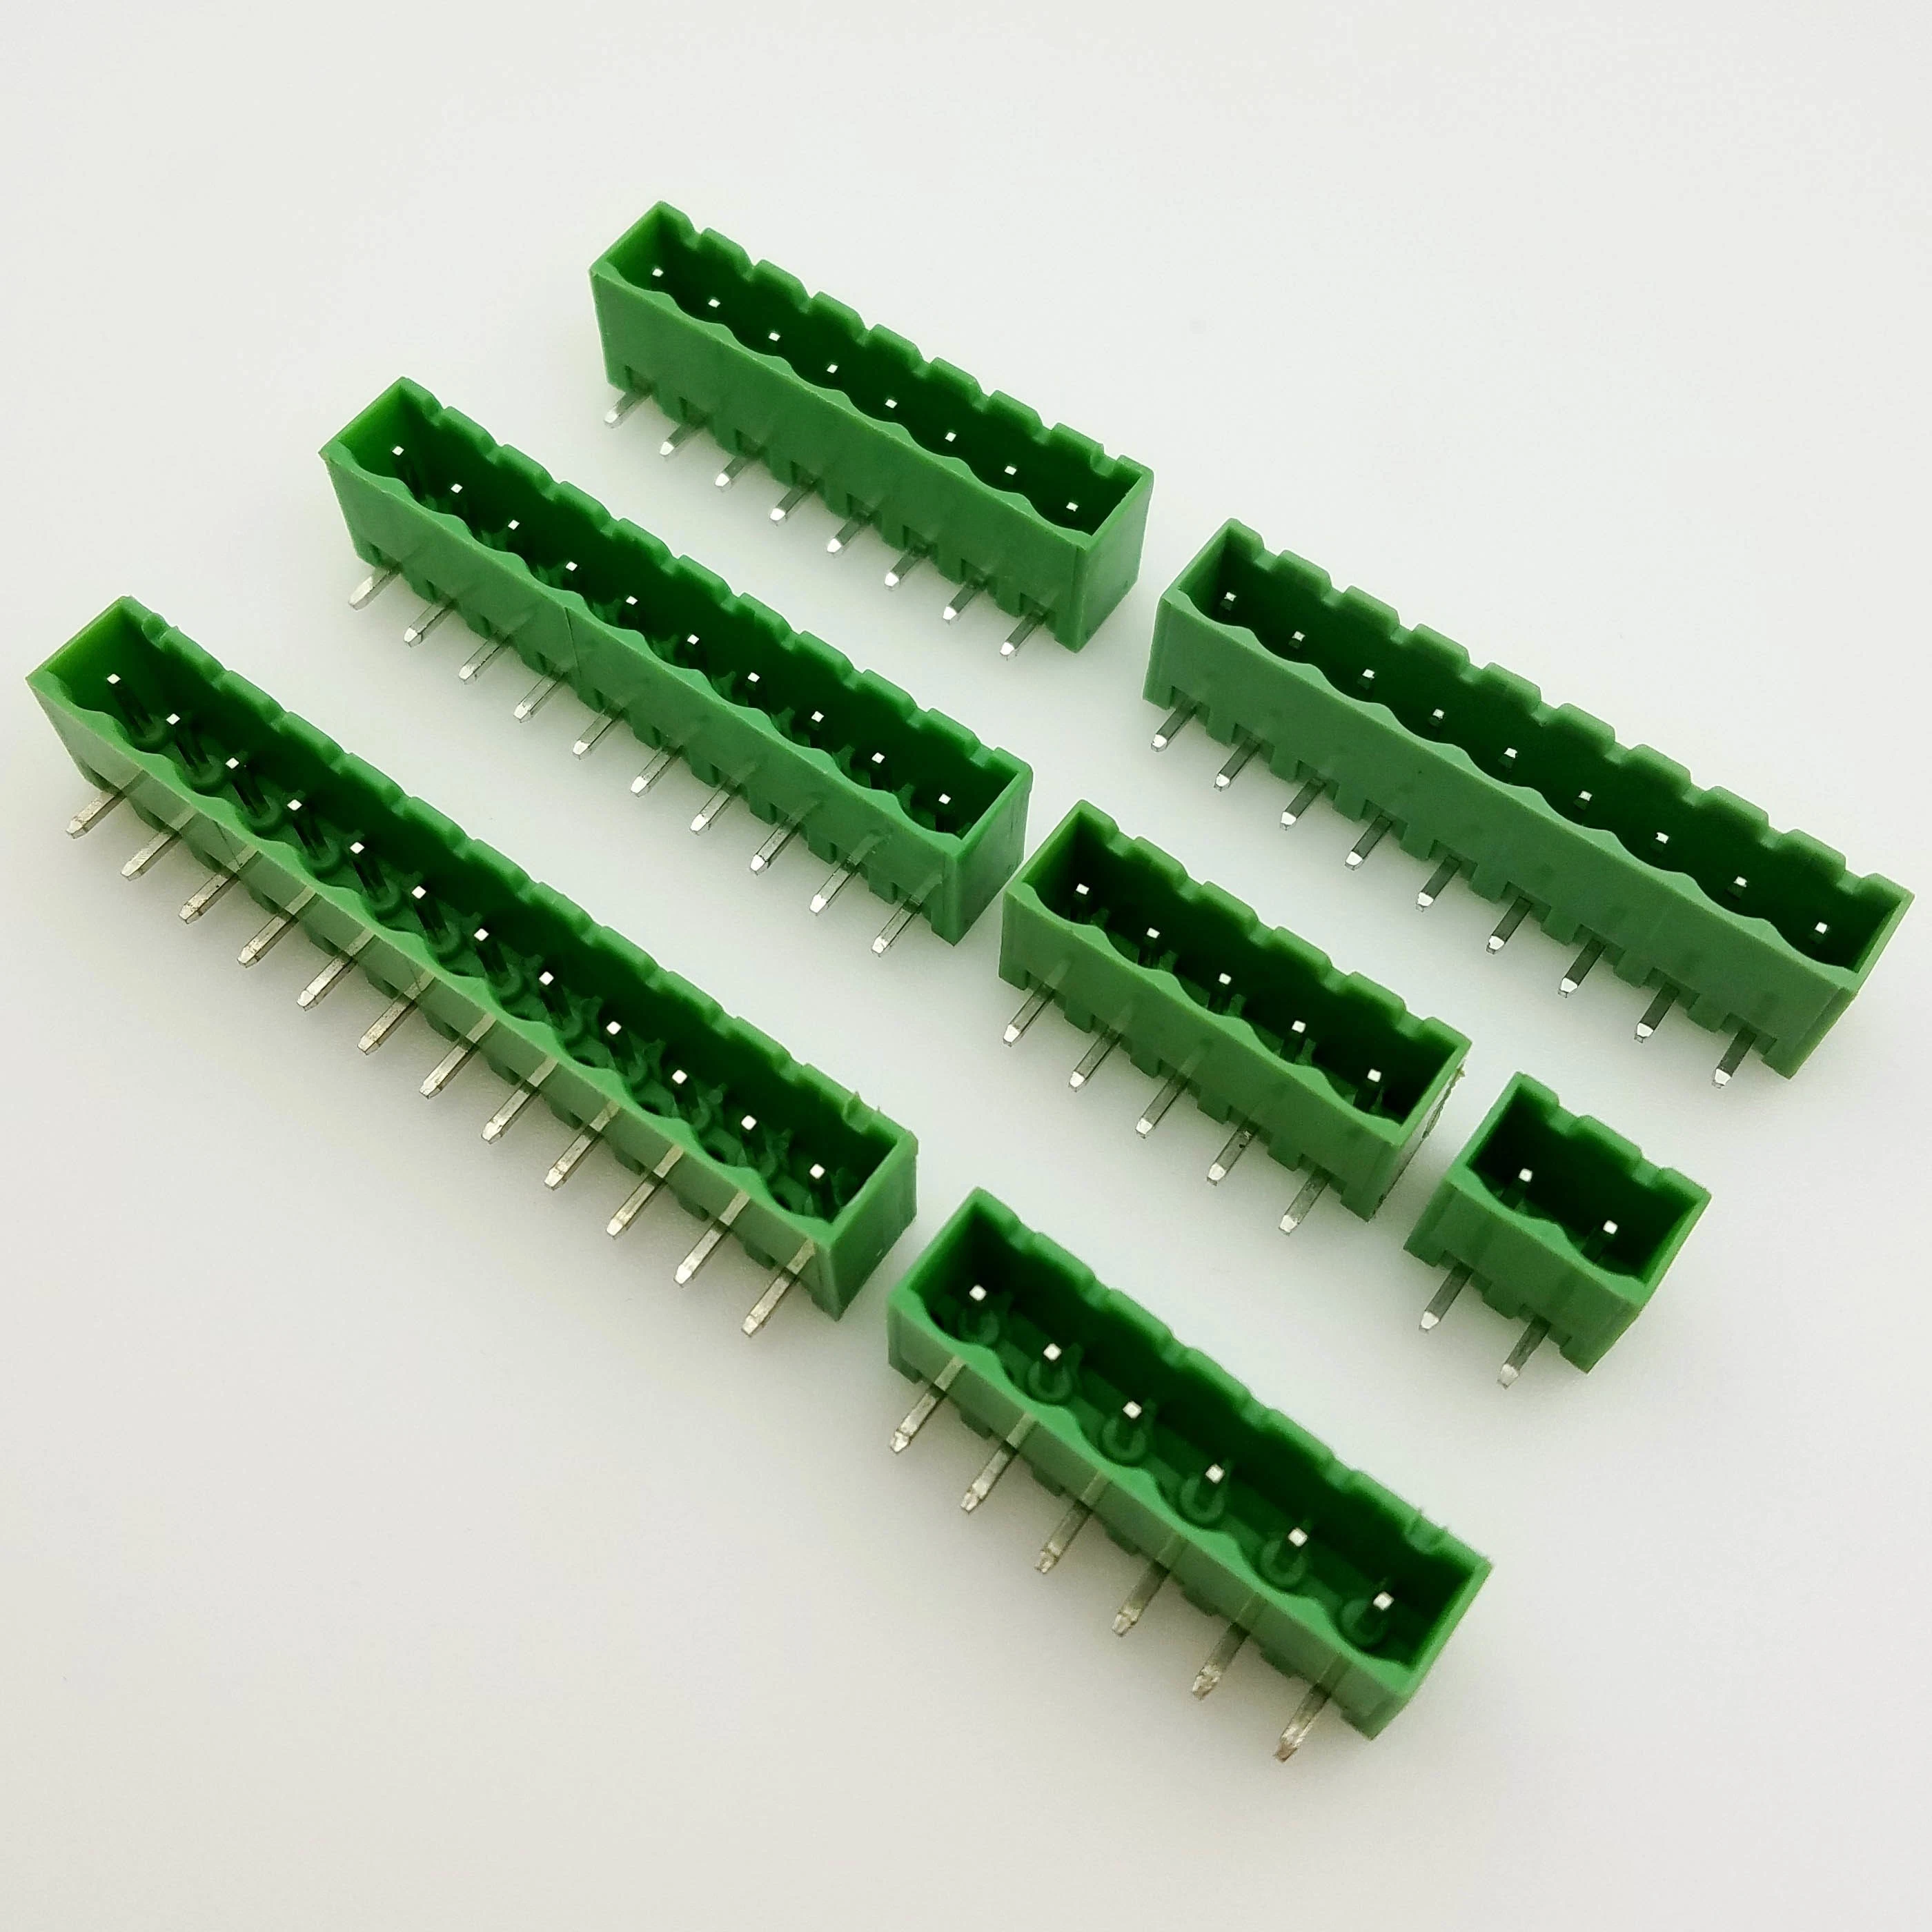 2p to 24p Pitch 5.00 5.08mm PCB Connector Socket Pluggable Terminal Blocks